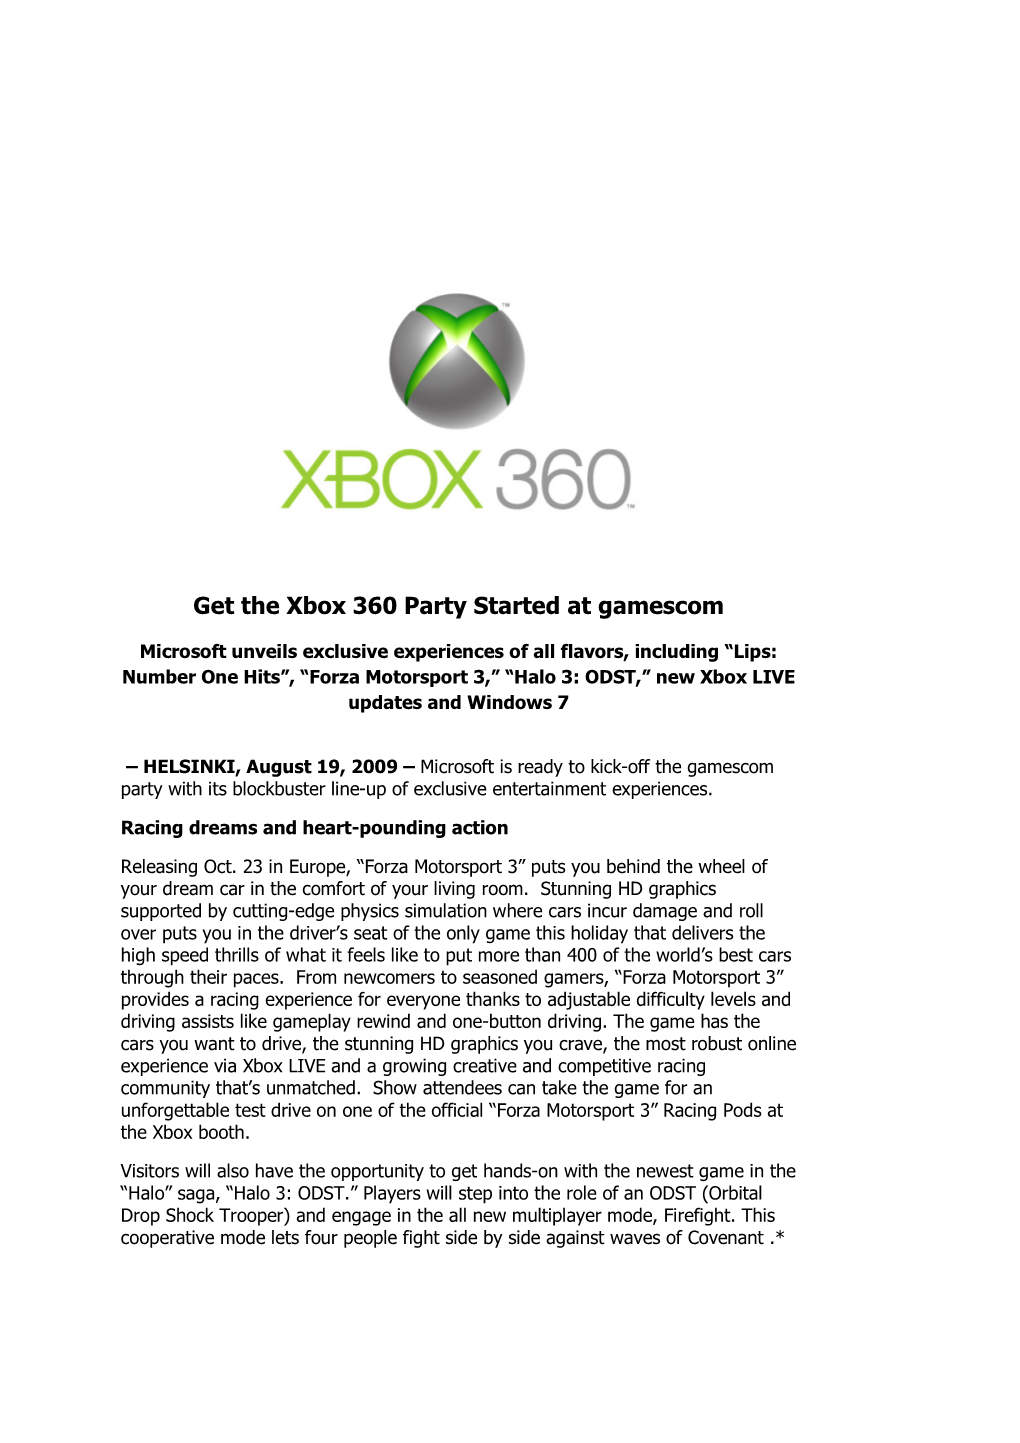 Get the Xbox 360 Party Started at Gamescom